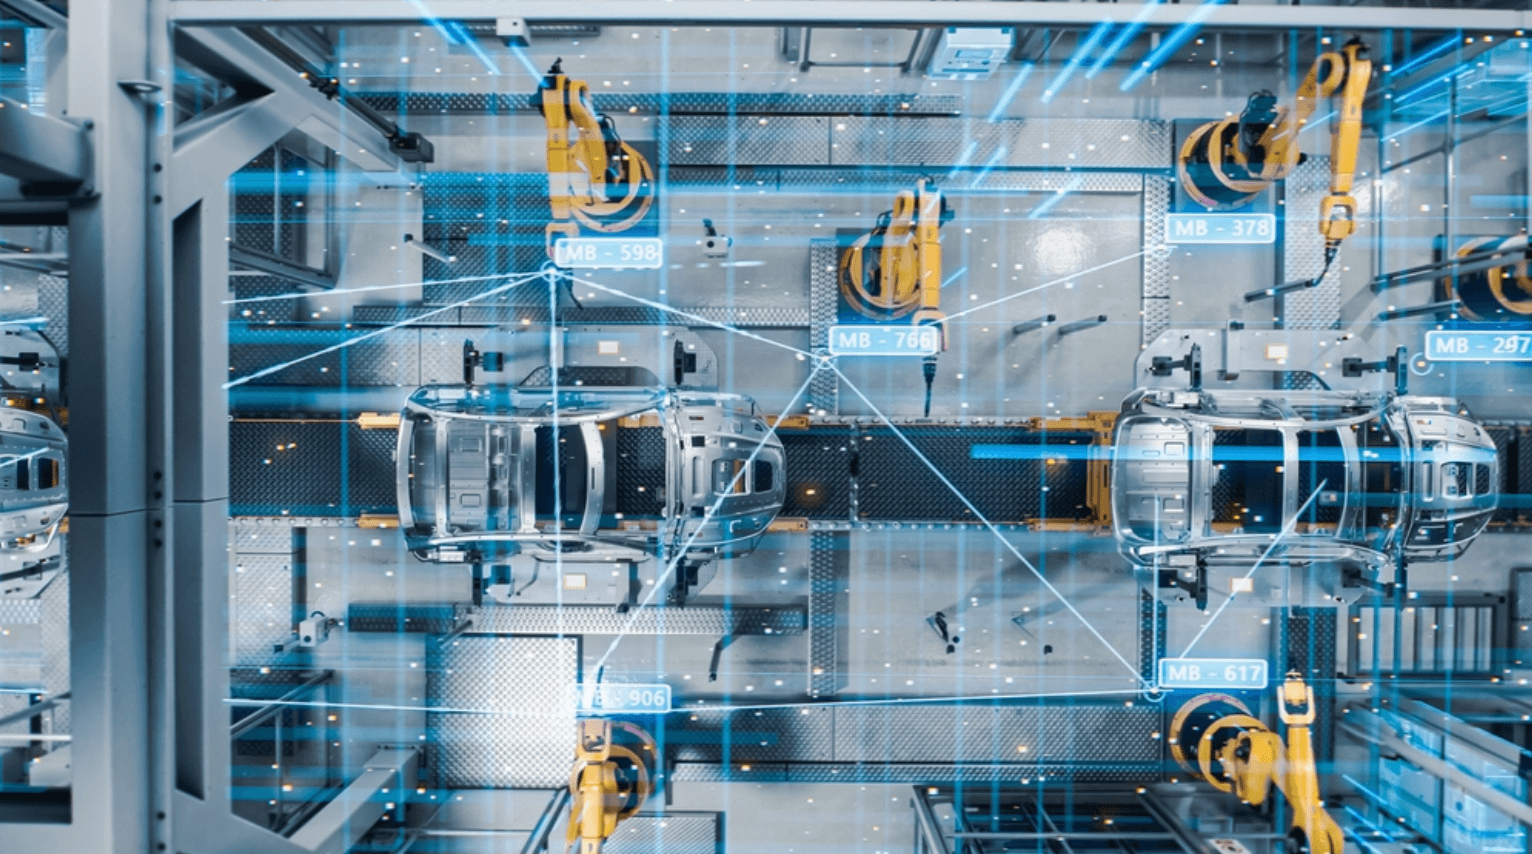 Connectivity: Catalyst for Industrial Revolution